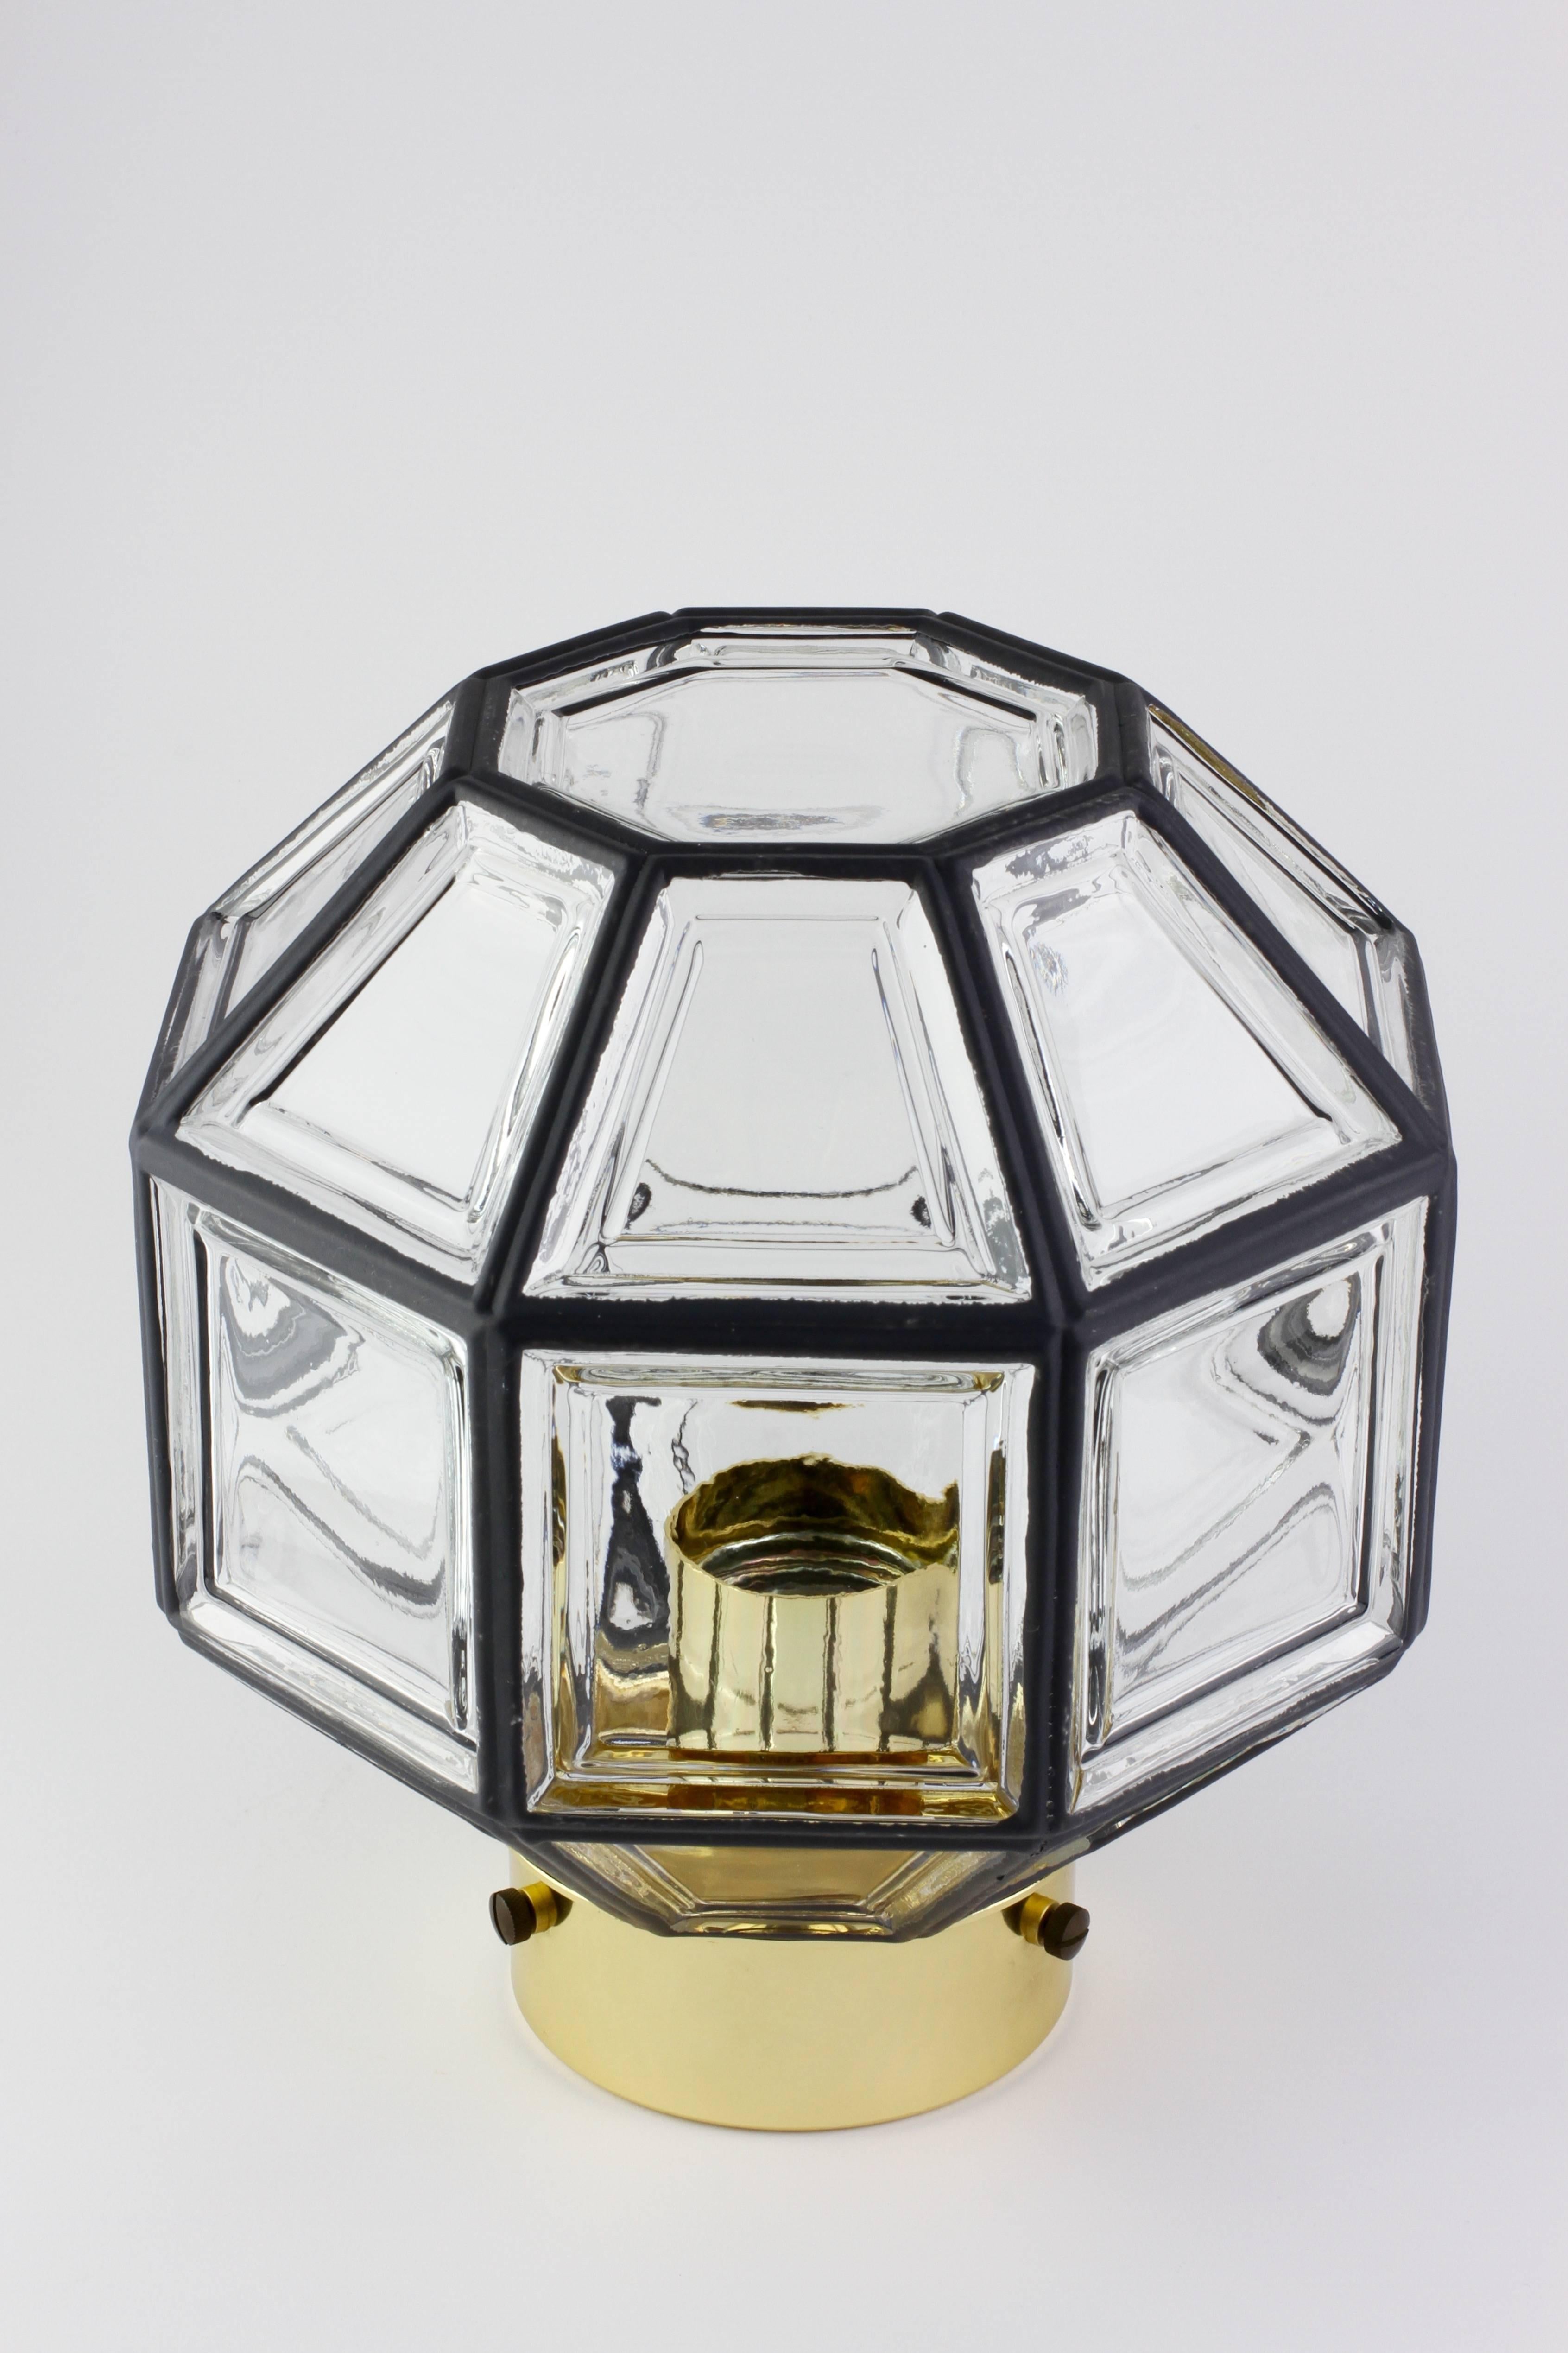 Set of three octagonally shaped, midcentury Minimalist German made clear glass and polished brass flush mount light fixtures or lamps designed Hans Agne Jakobsson and made by Glashütte, Limburg, circa 1965. These Contemporary Art Deco and lantern